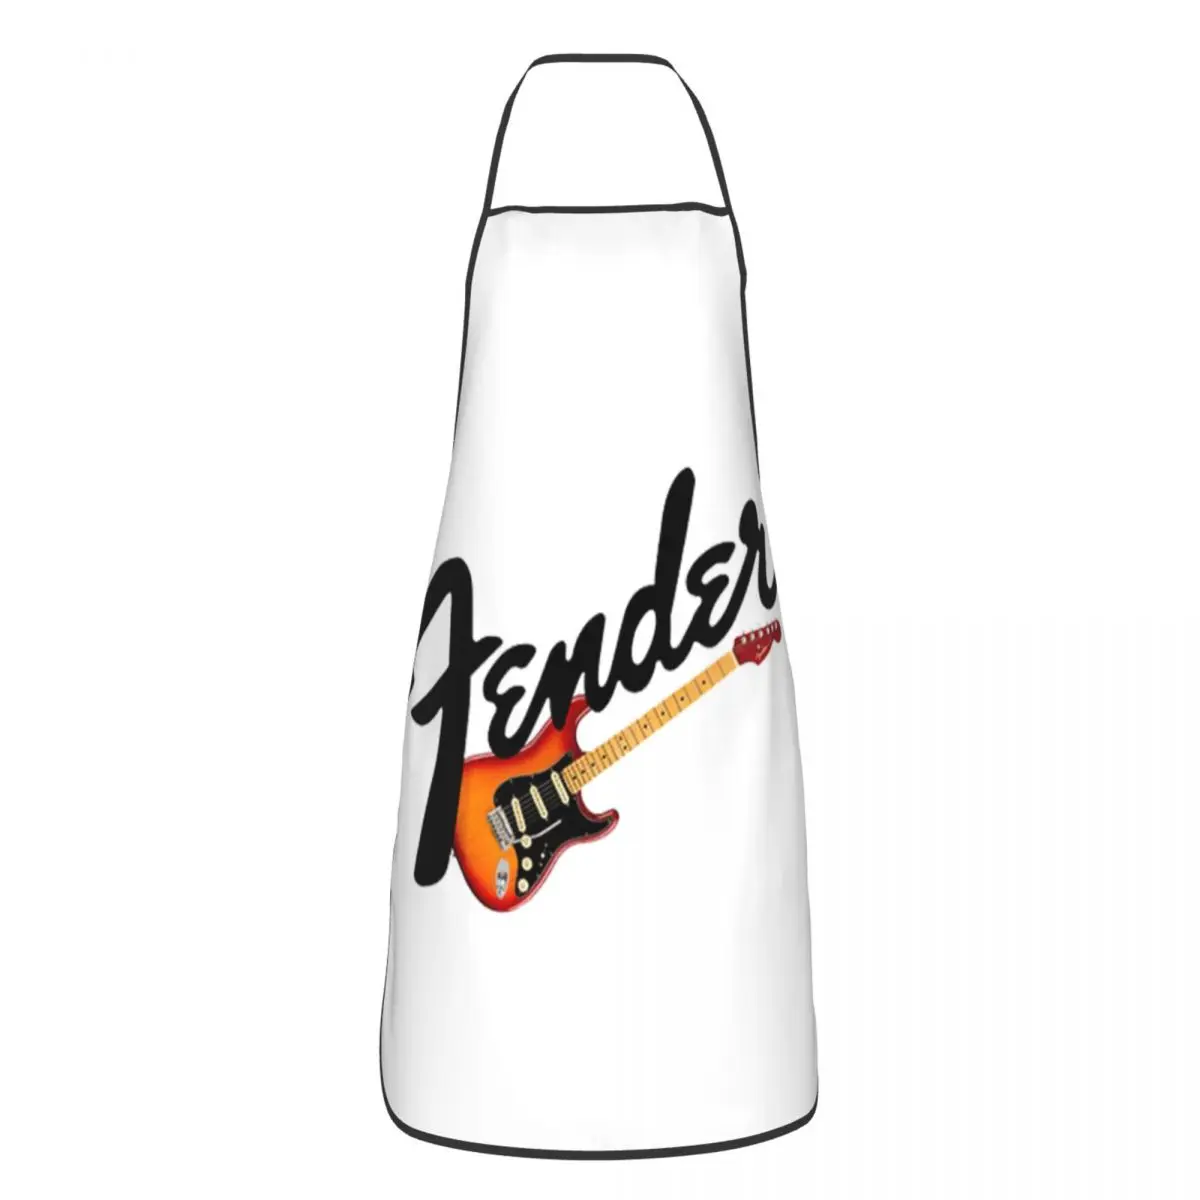 

Fender Strat Classic Aprons Chef Cooking Cuisine Tablier Waterproof Bib Kitchen Cleaning Pinafore for Women Men Painting